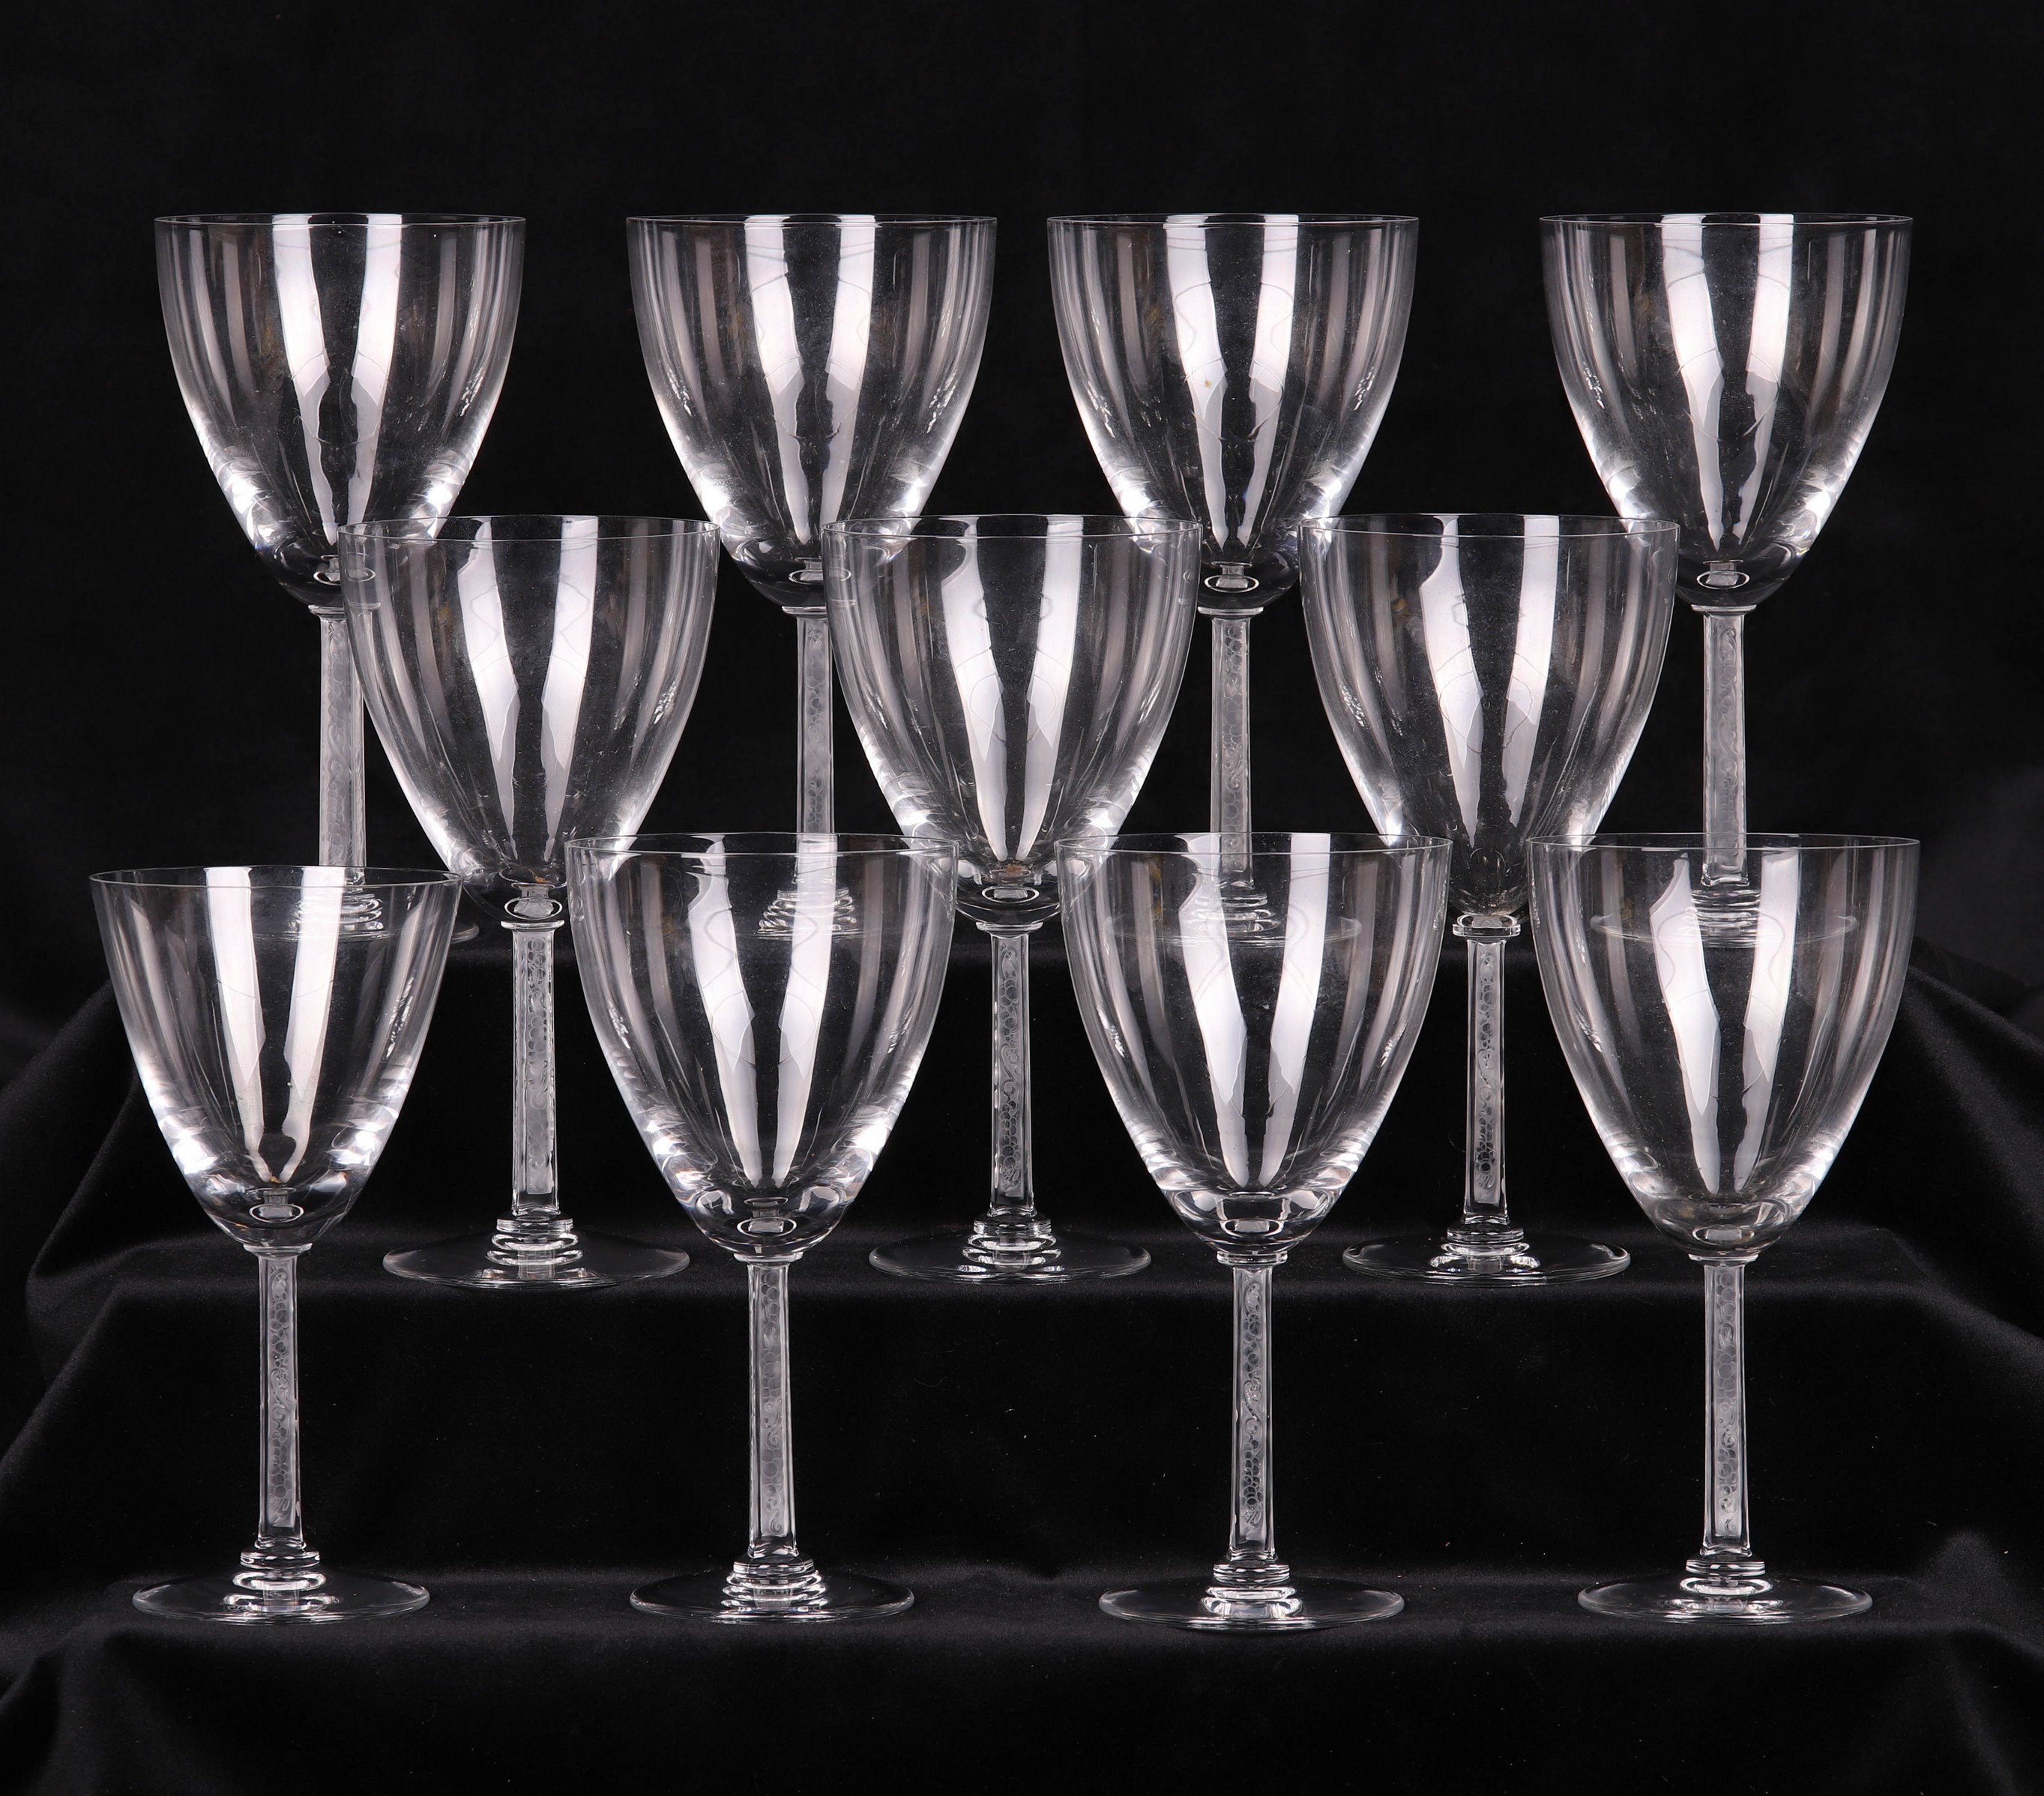  11 Lalique crystal water goblets  27a43c